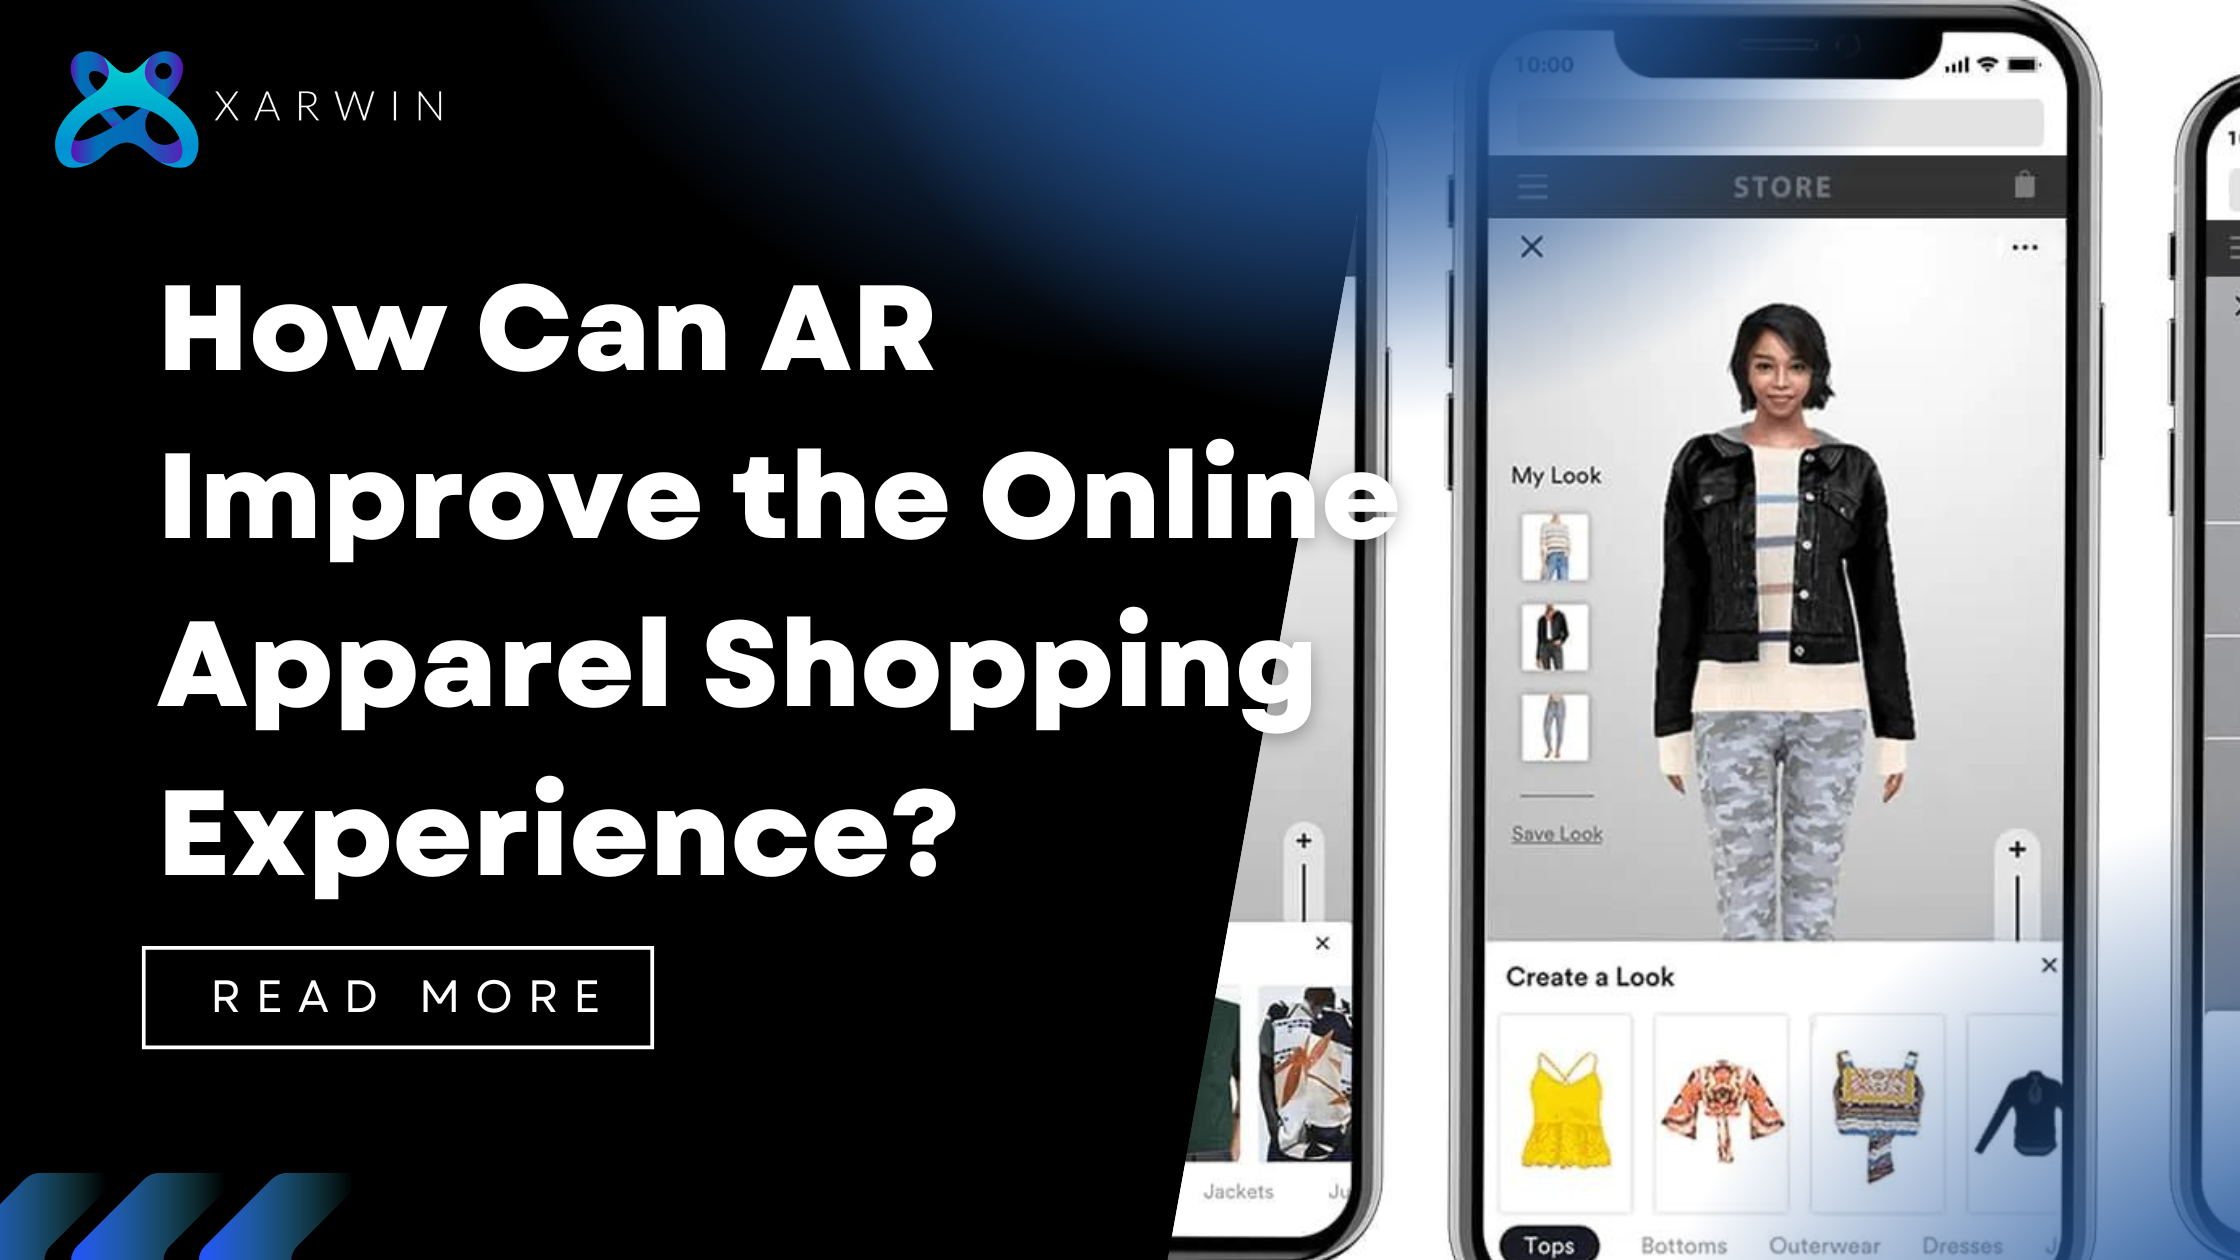 How Can AR Improve the Online Apparel Shopping Experience